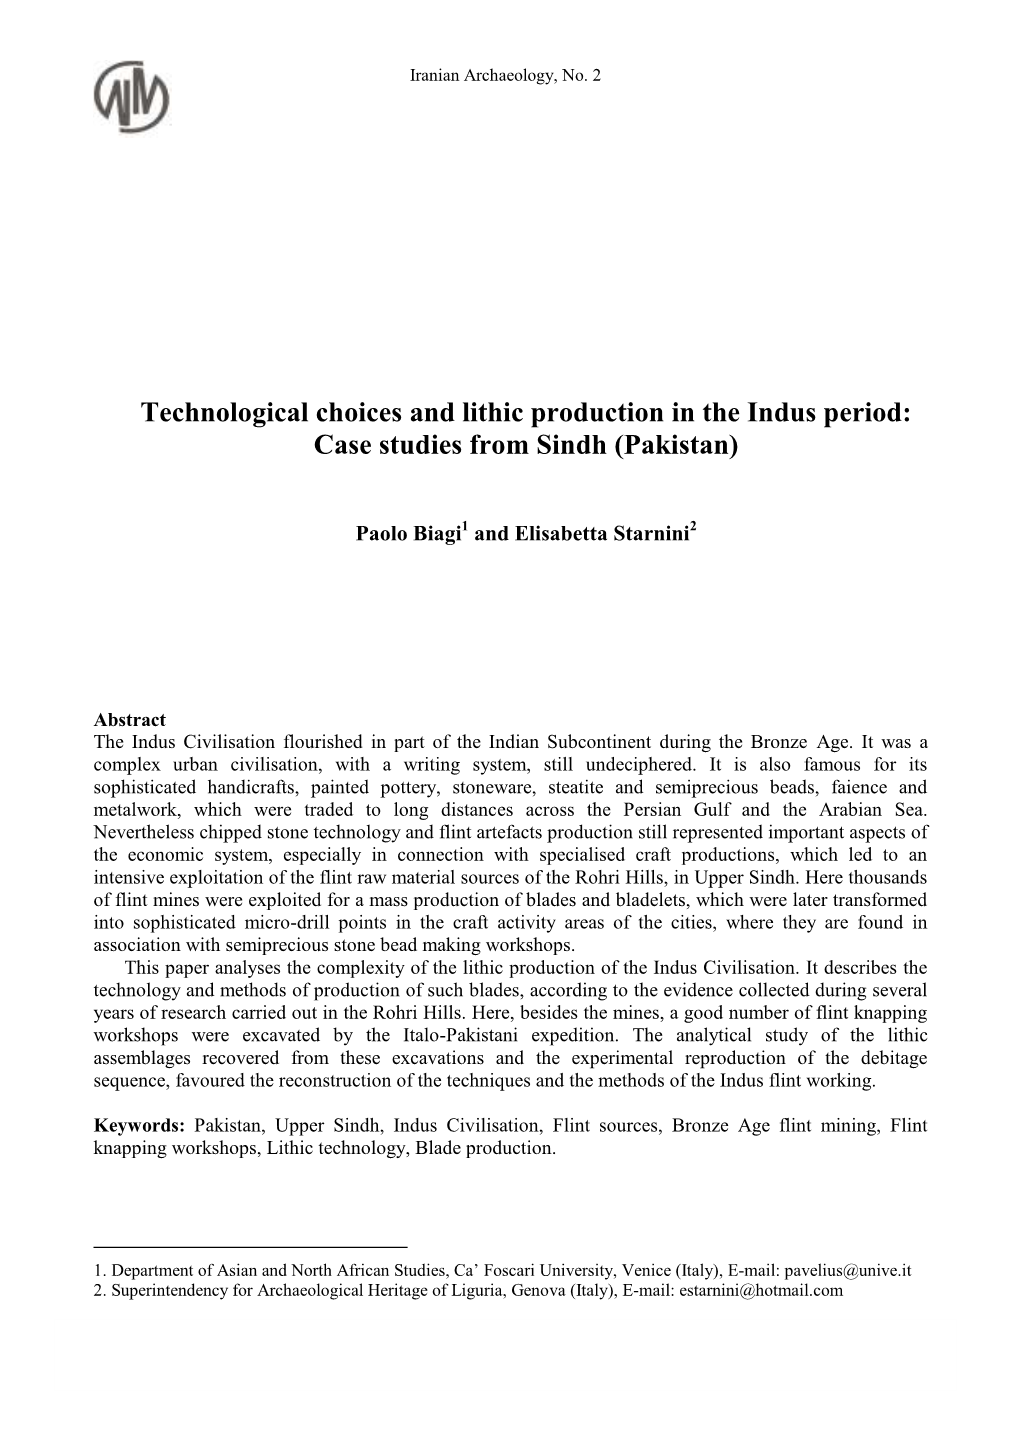 Technological Choices and Lithic Production in the Indus 22